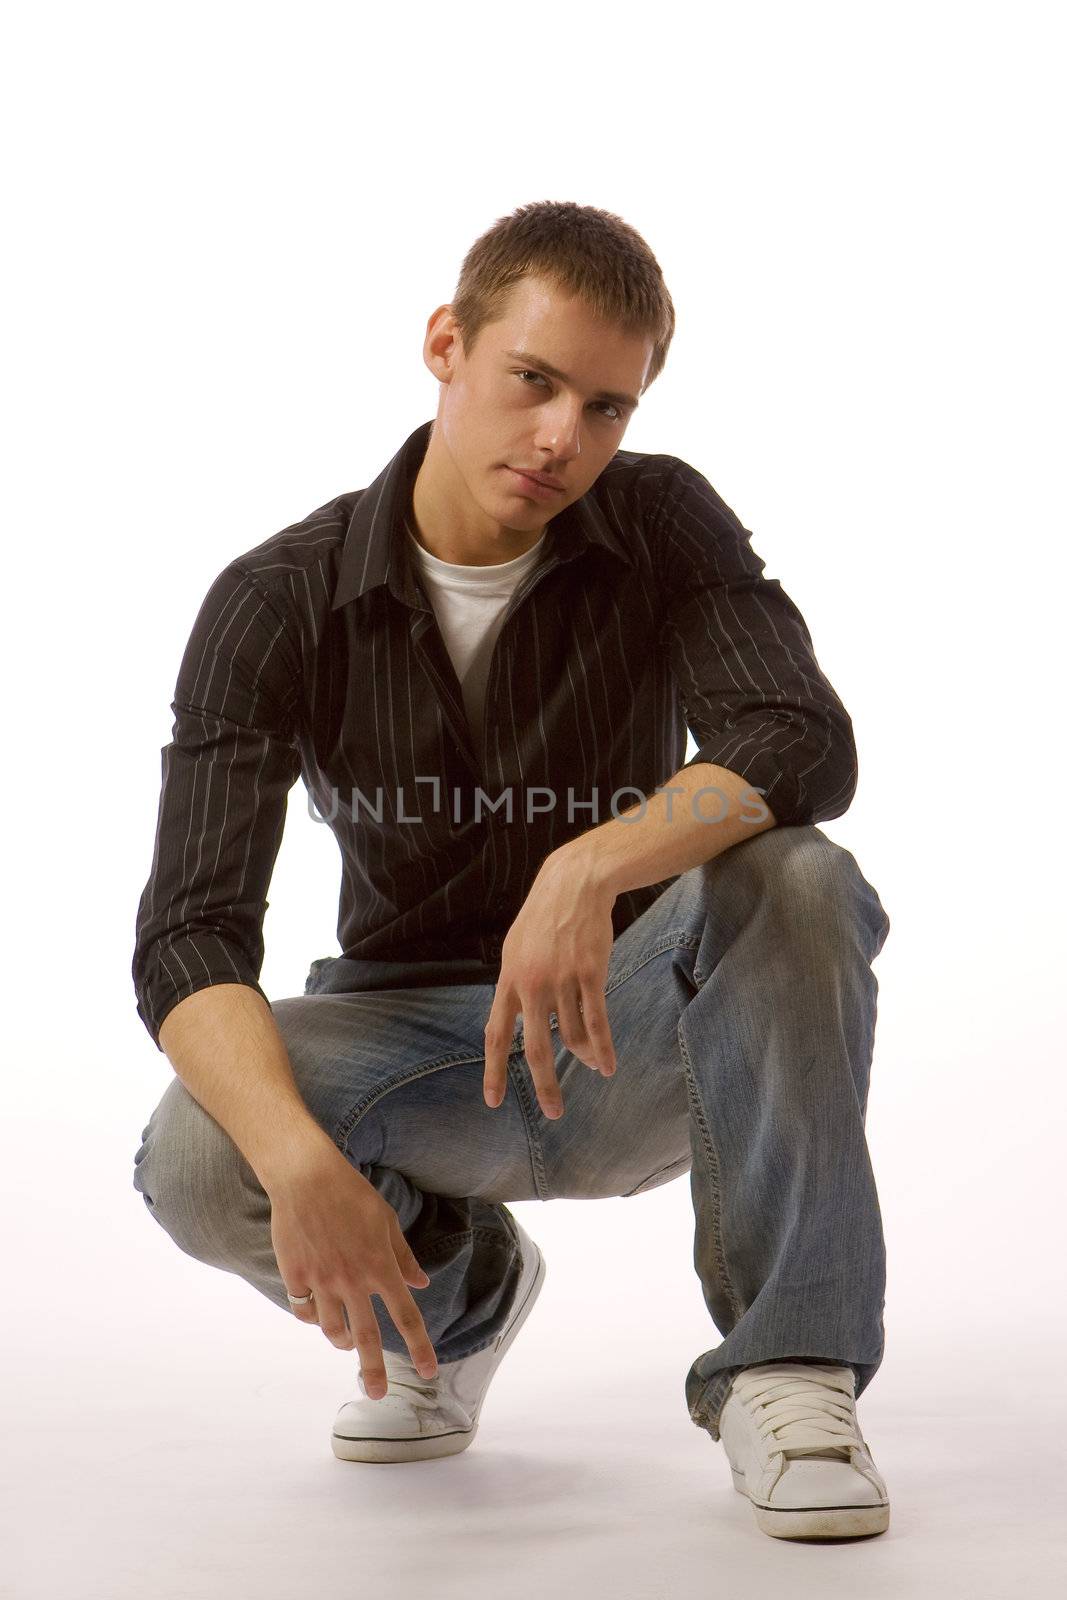 The young man posing in studio by MIL